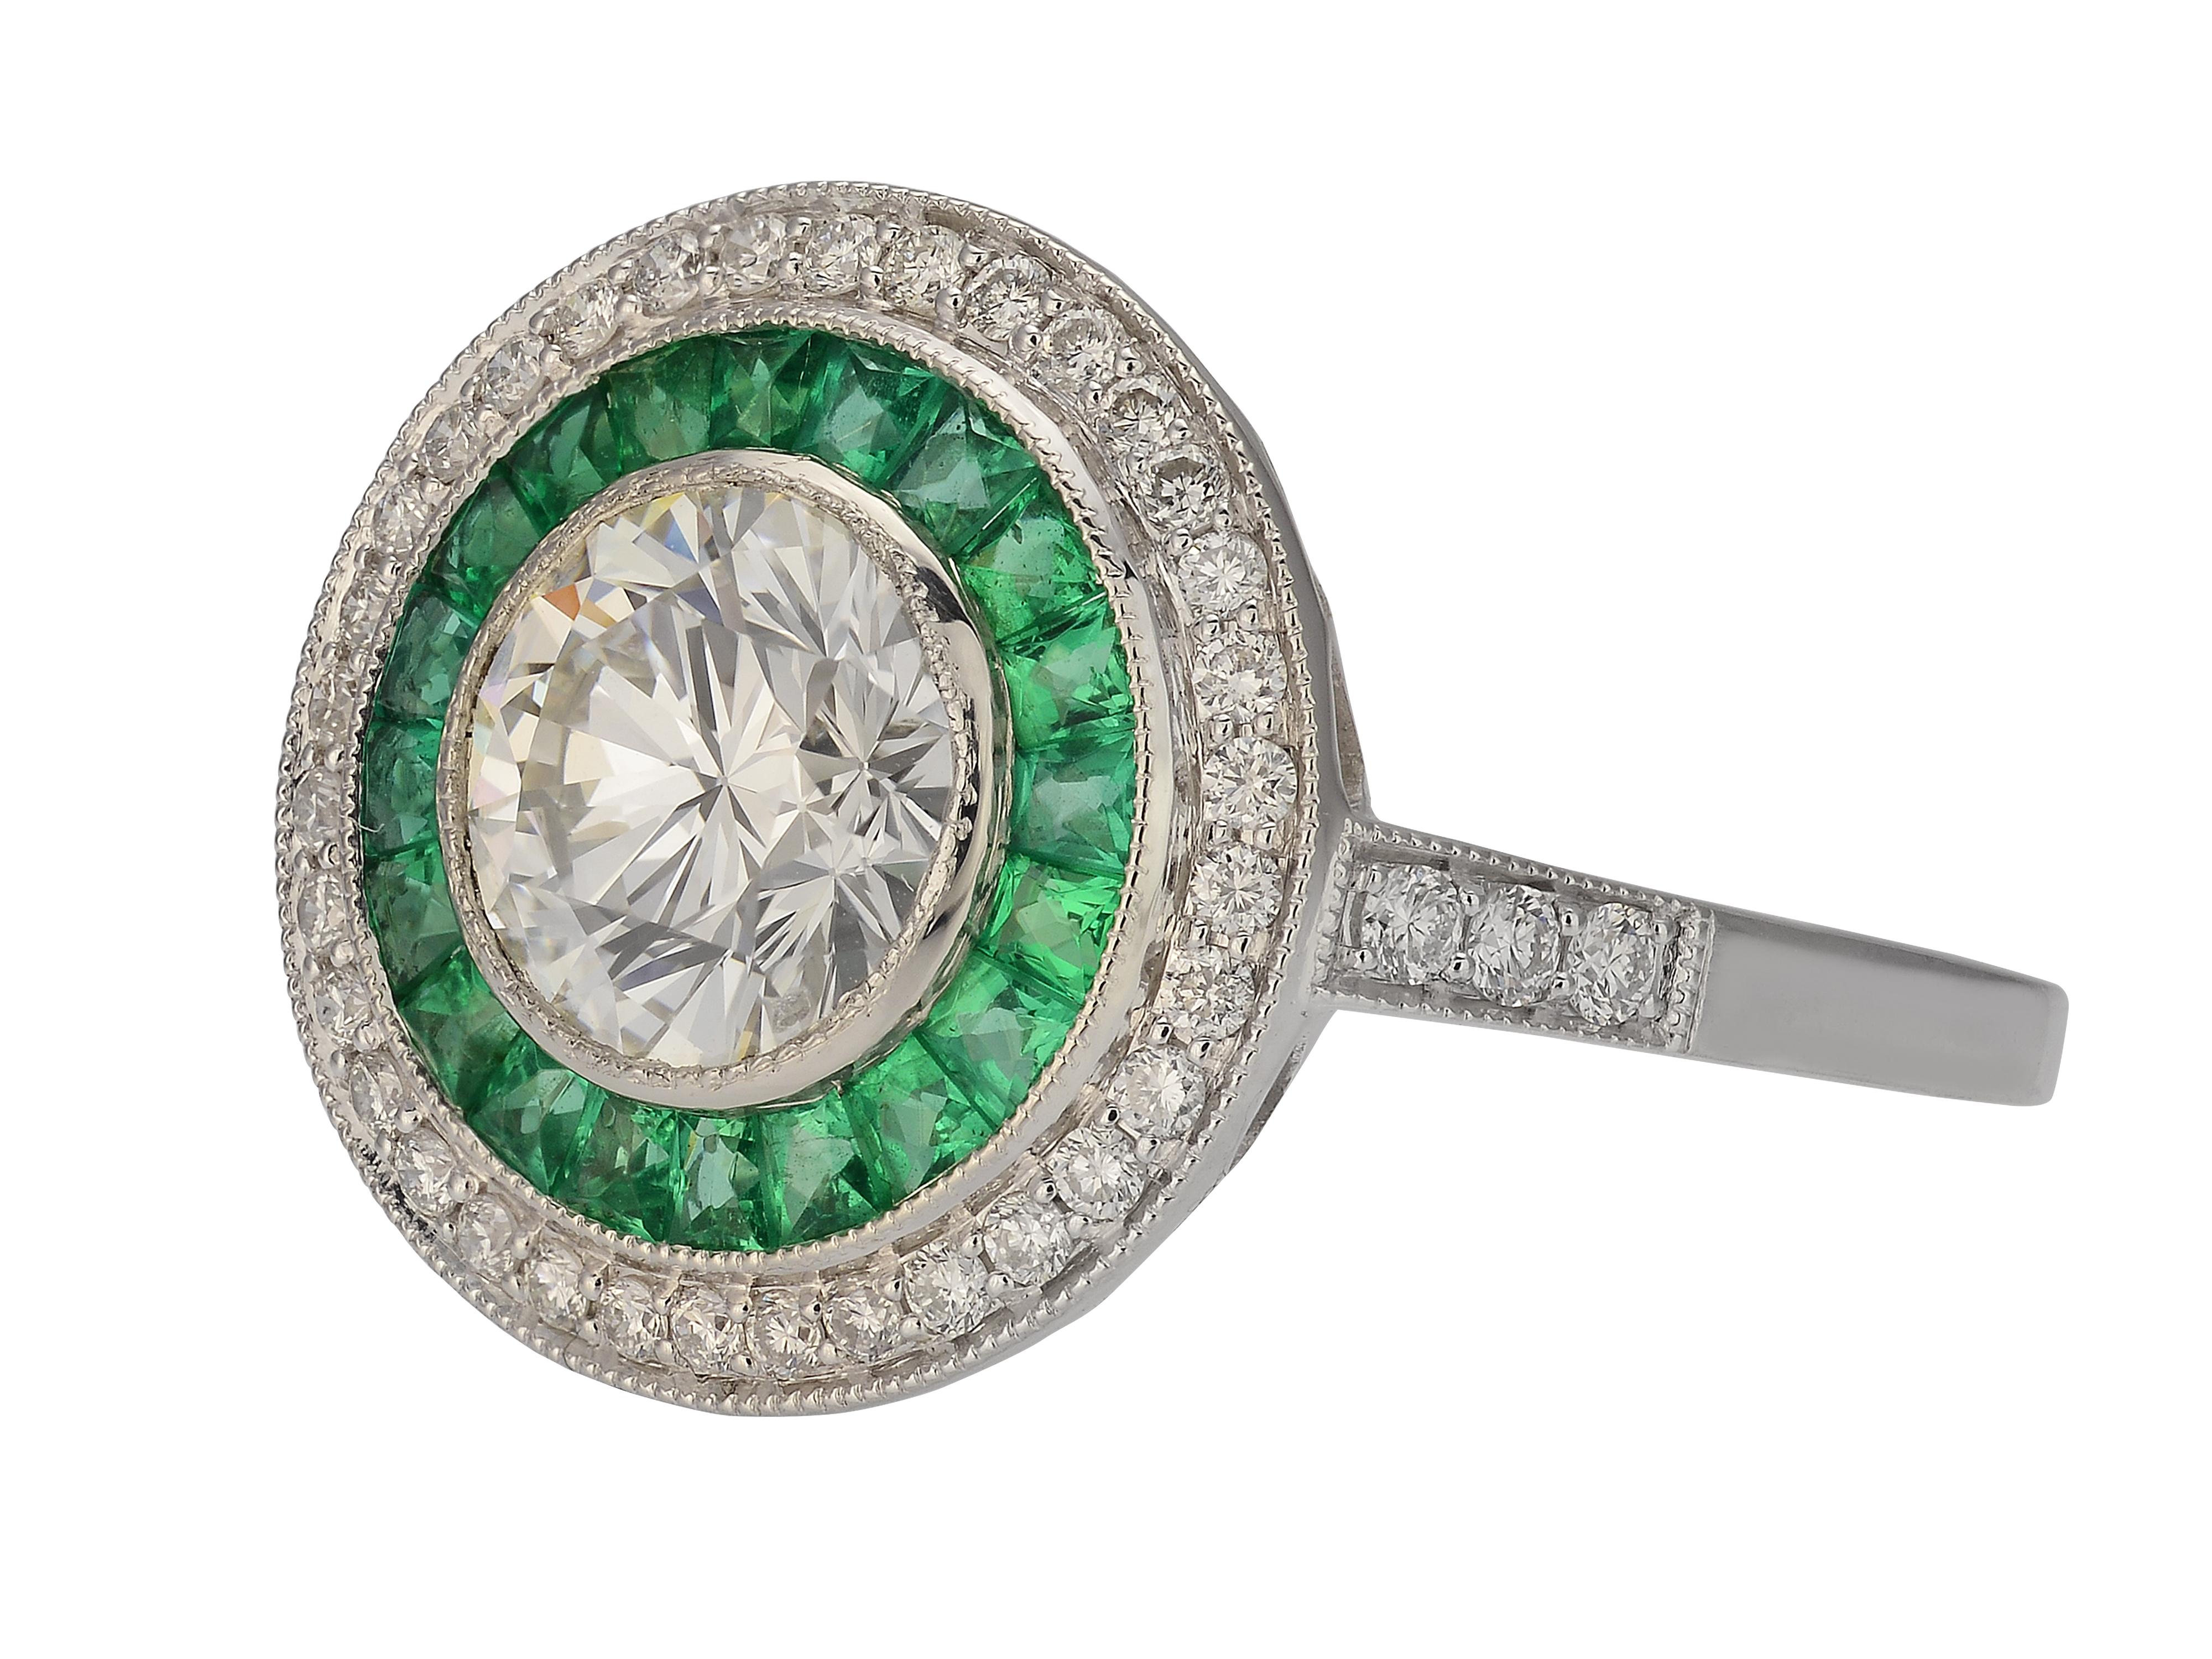 Vintage Inspired Platinum Art Deco Ring Featuring A Bezel Set 1.34 Carat Round Diamond GIA Graded as SI2 Clarity & J Color. It Is Surrounded By 20 Caliber Cut Emeralds Totaling 0.47 Carats, 40 VS Clarity & G Color Diamonds Totaling 0.29 Carats, & A